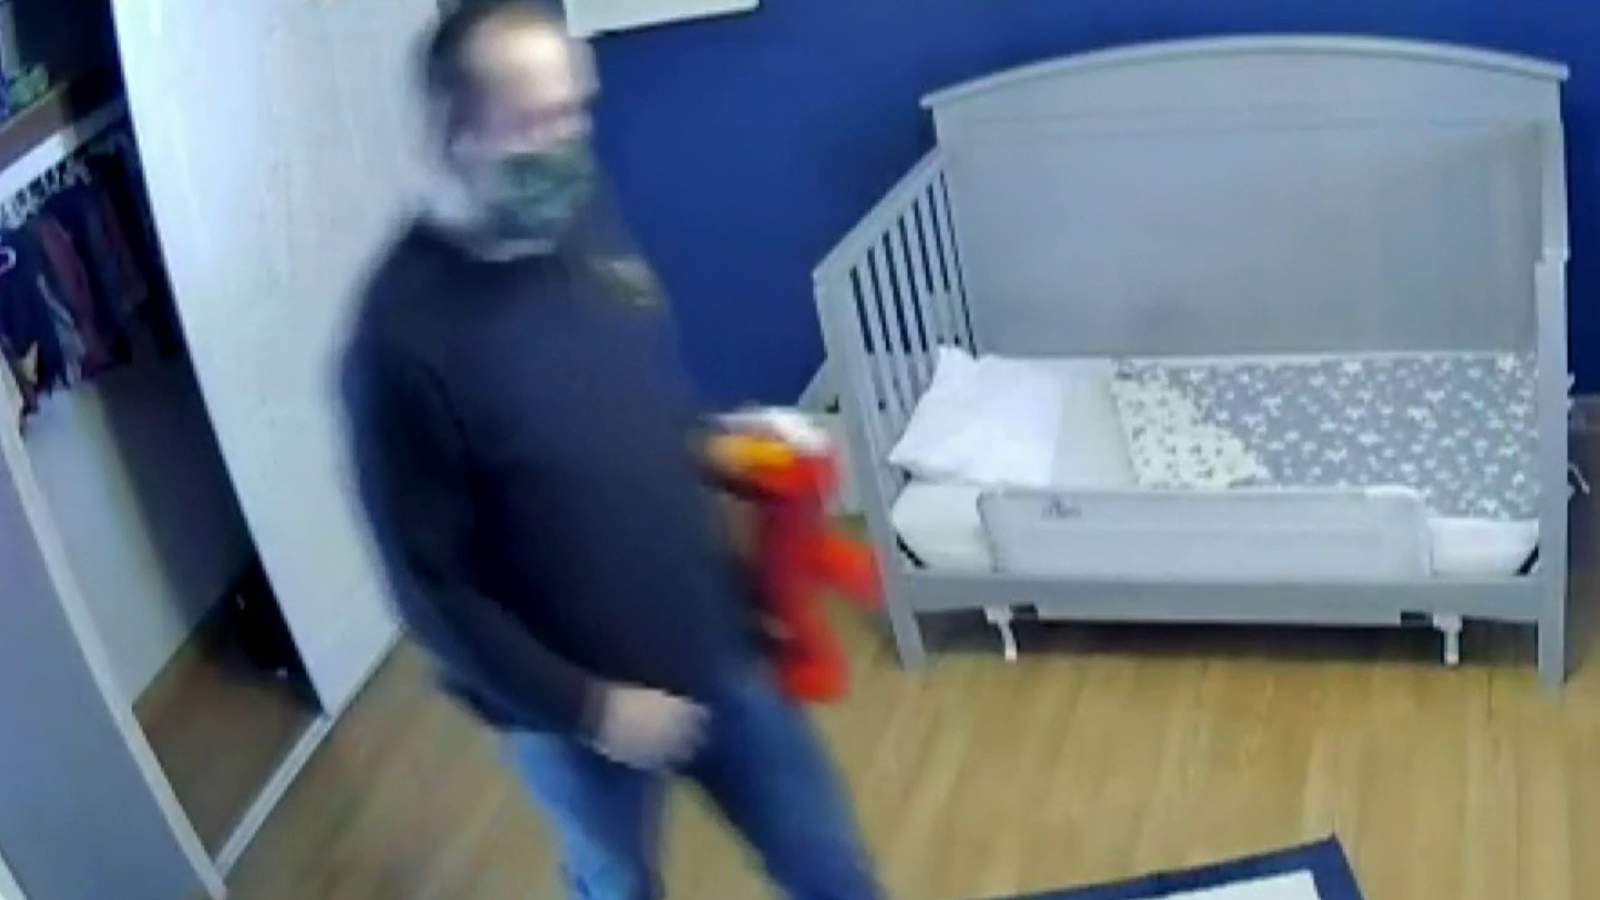 Metro Detroit homeowner speaks on catching inspector on camera touching himself with Elmo doll